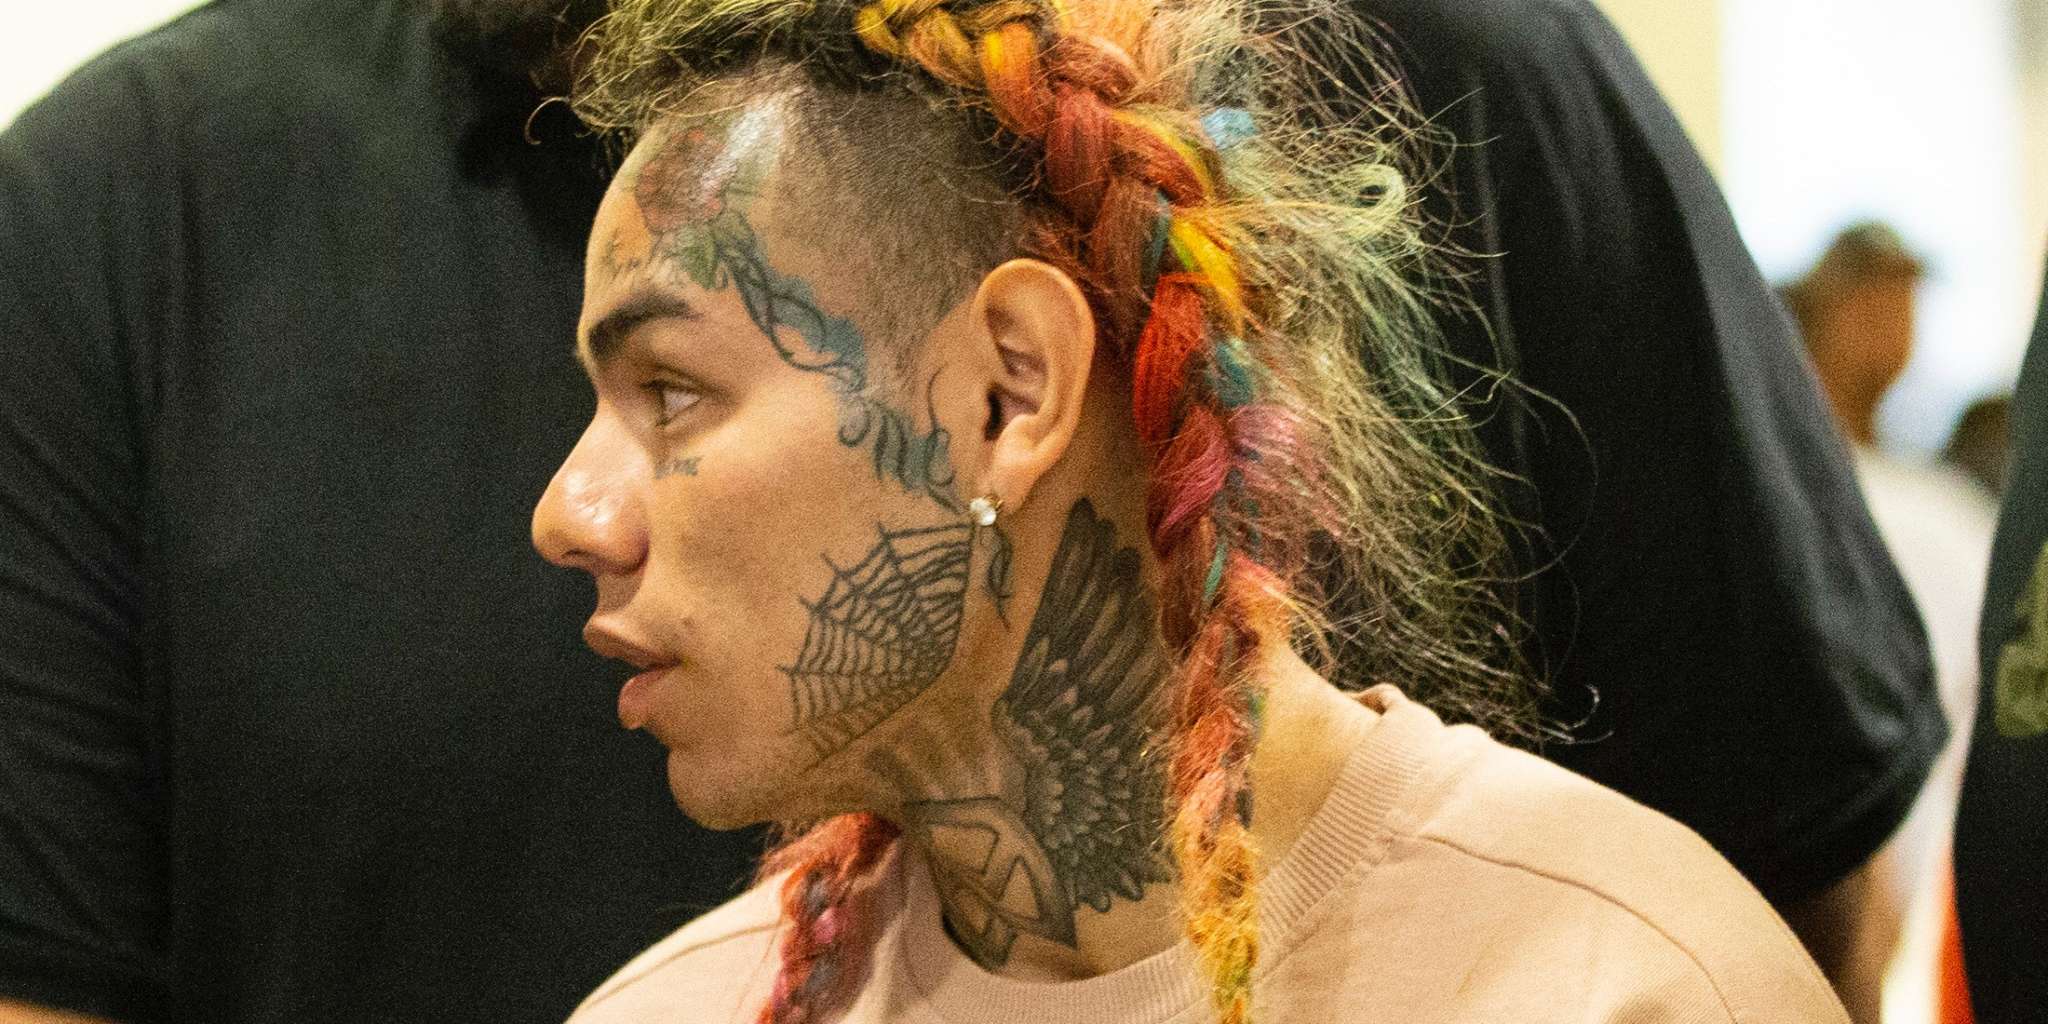 Tekashi 6ix9ine forced to move home after neighbour leaks address in video